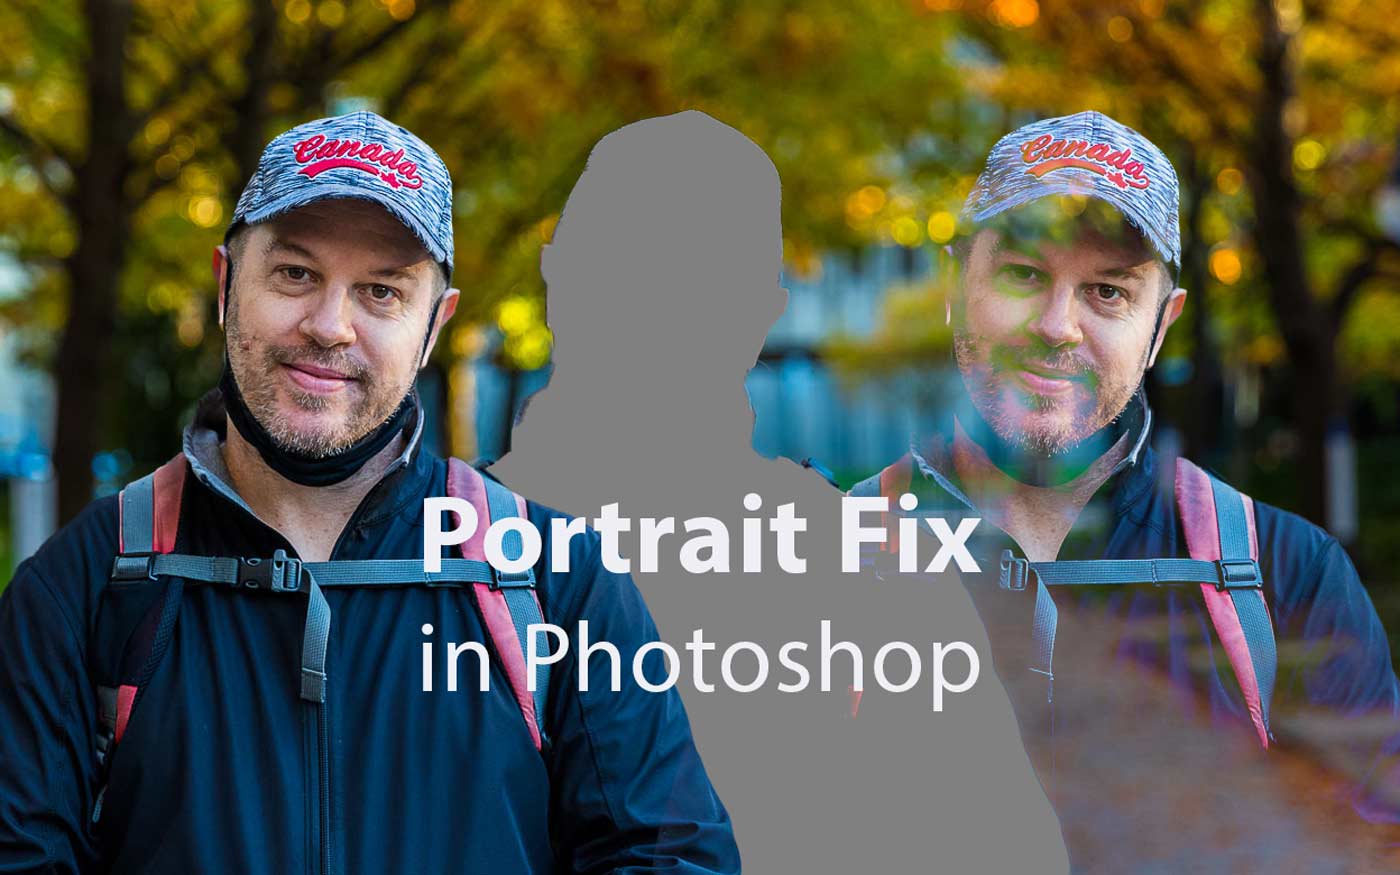 Fix Objects and Exposure in a Portrait Photo using Photoshop Tools (Premium Content)